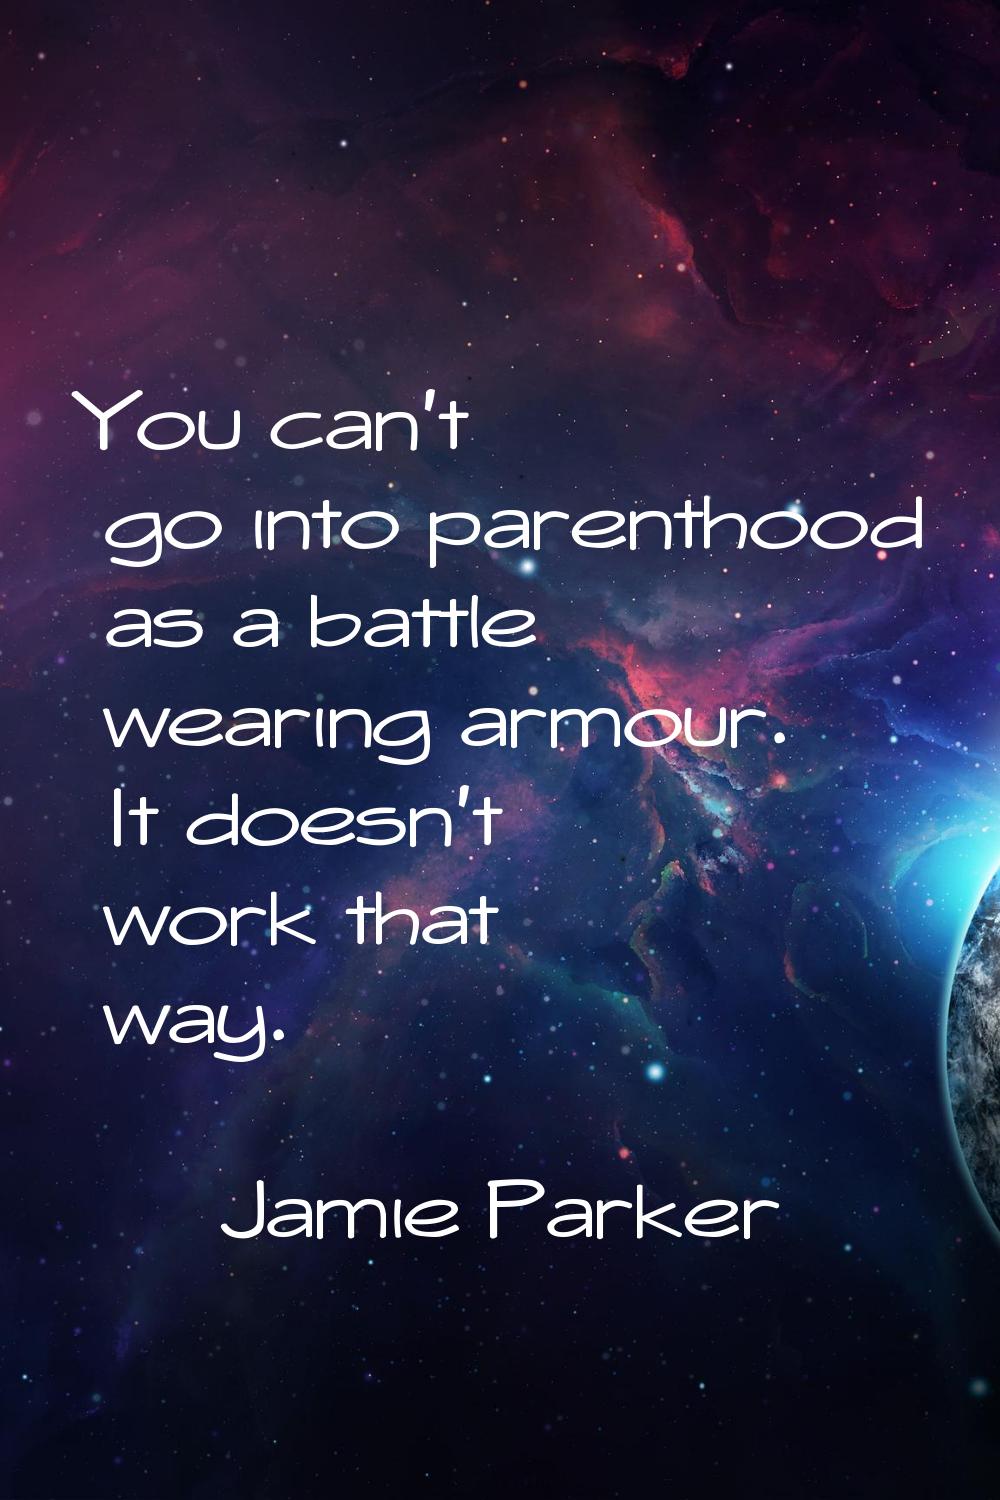 You can't go into parenthood as a battle wearing armour. It doesn't work that way.